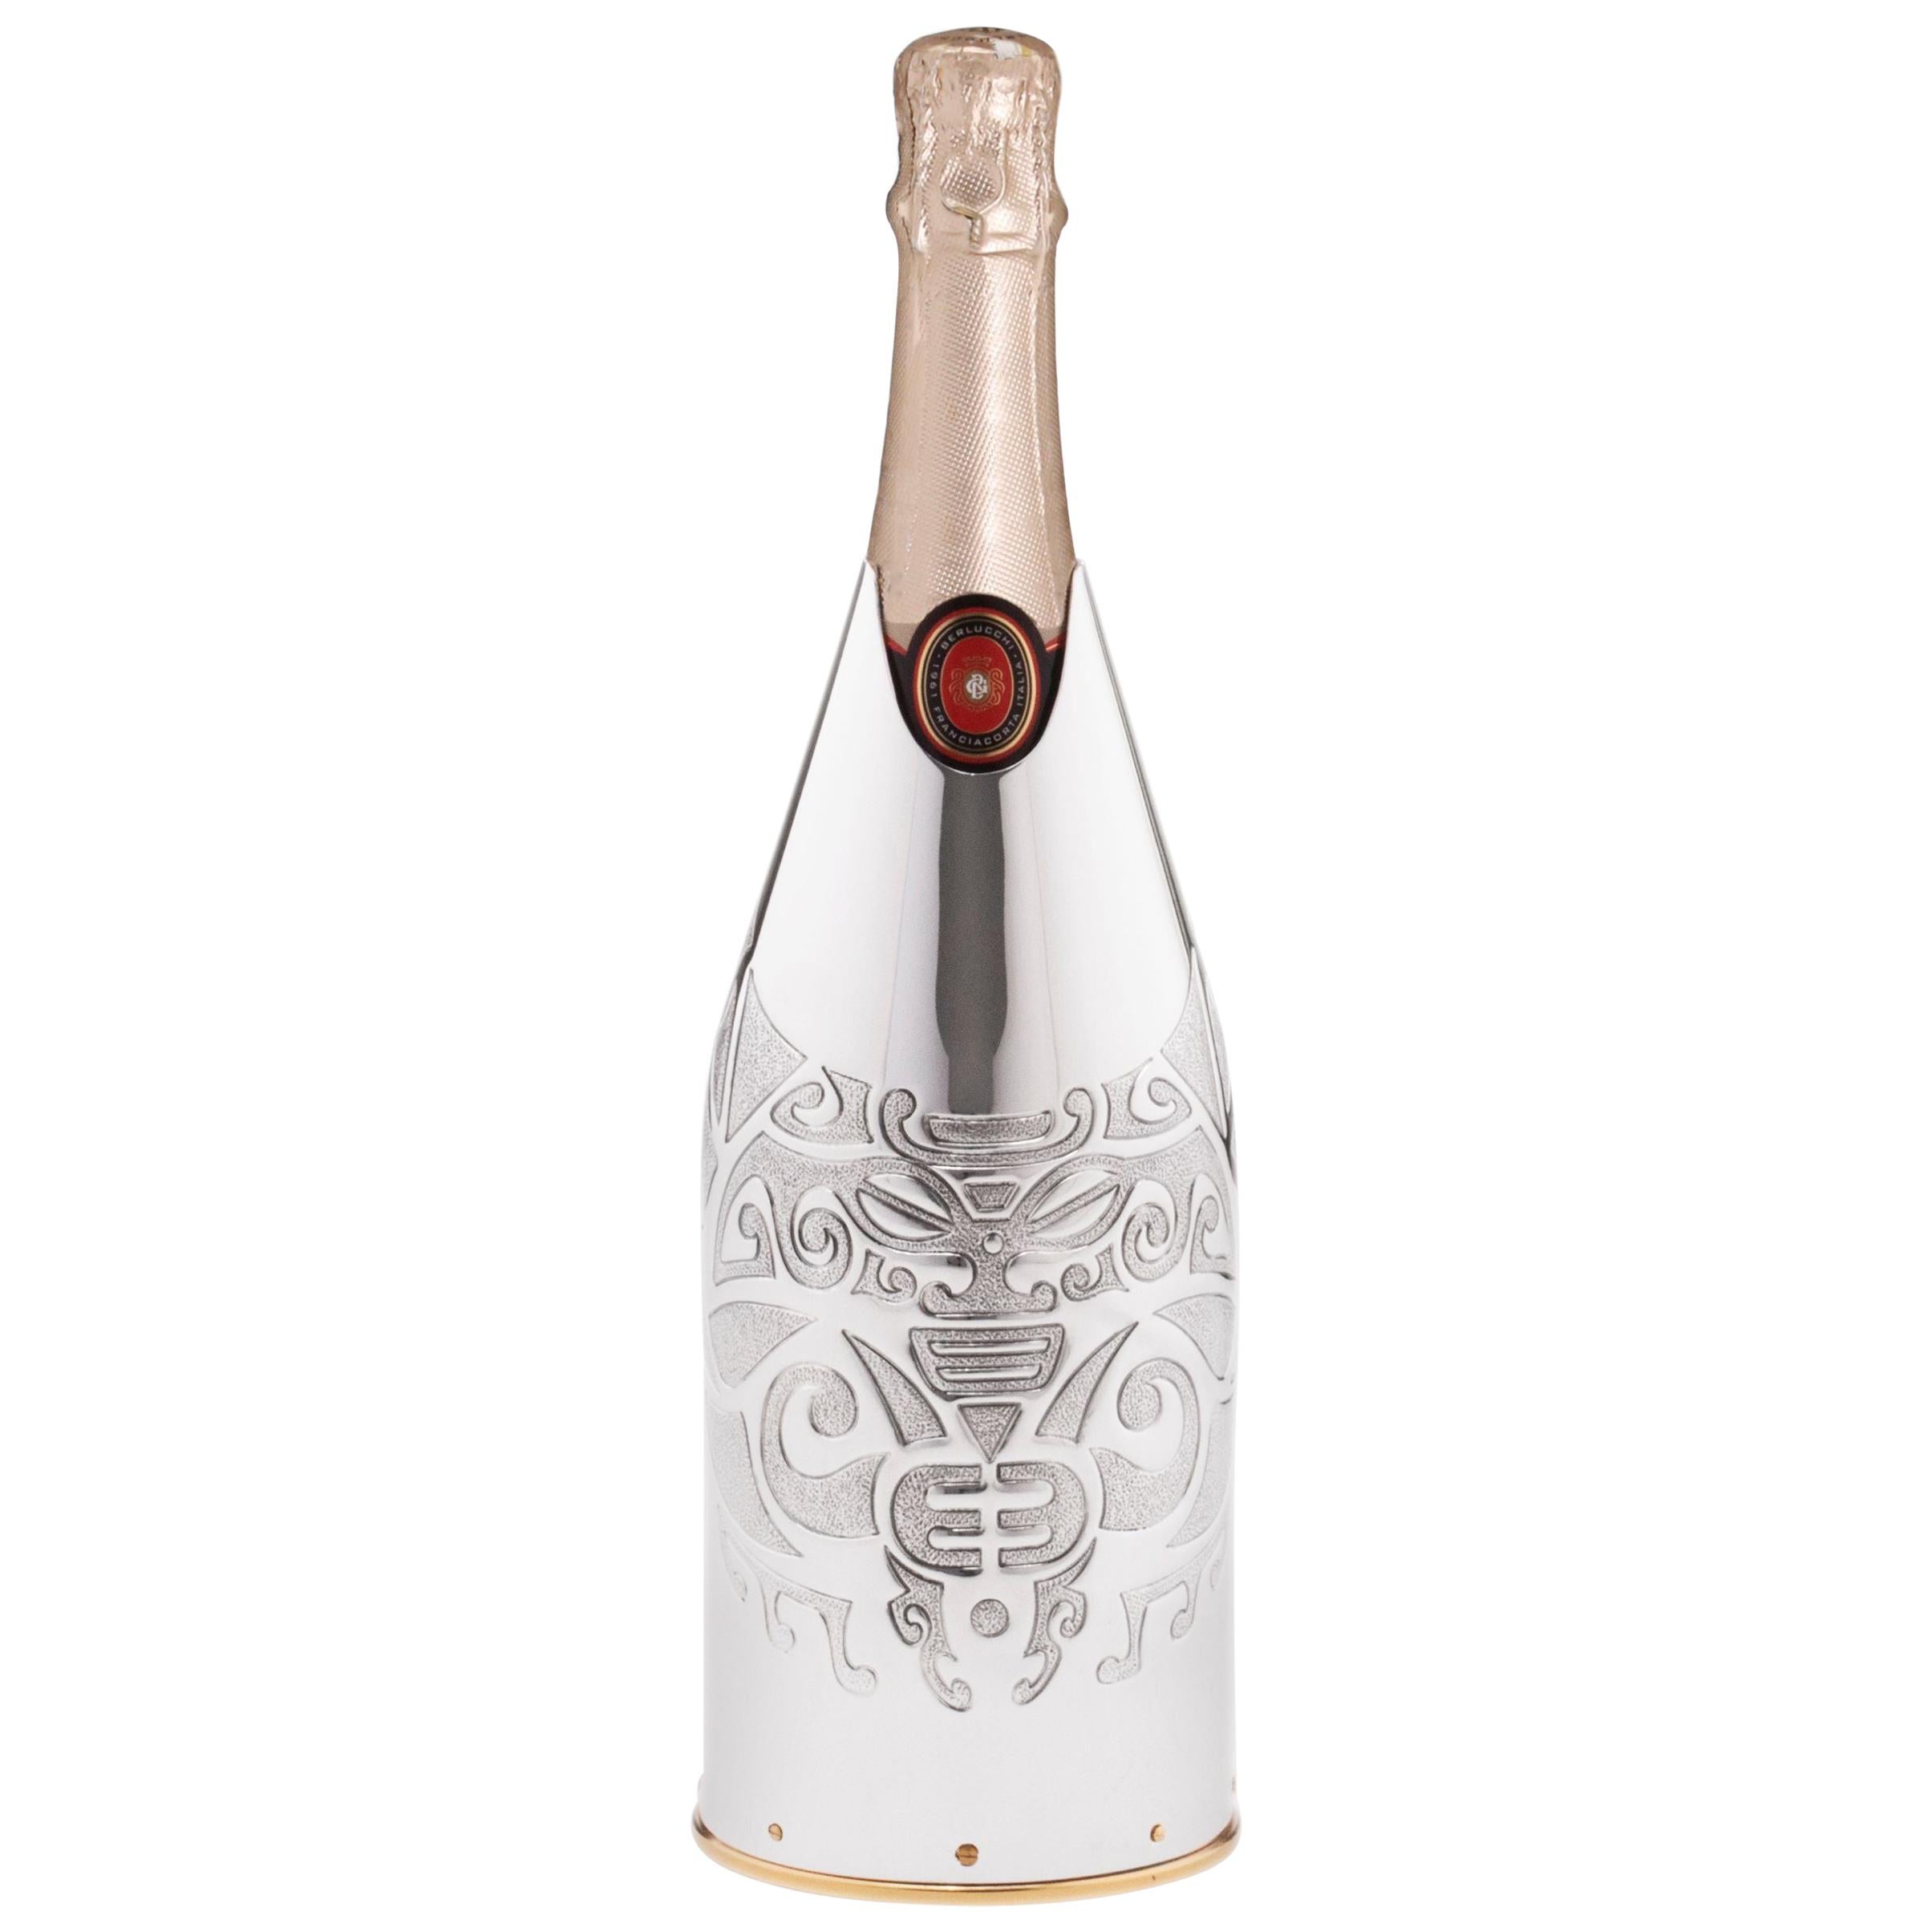 This champagne cover belongs to our collection “K-over Design”.This pure silver 999/°° K-OVER is inspired by the Maori tradition. The artist wanted to represent human strength, Maori geometrical figures were perfect for this purpose. 

The cover has